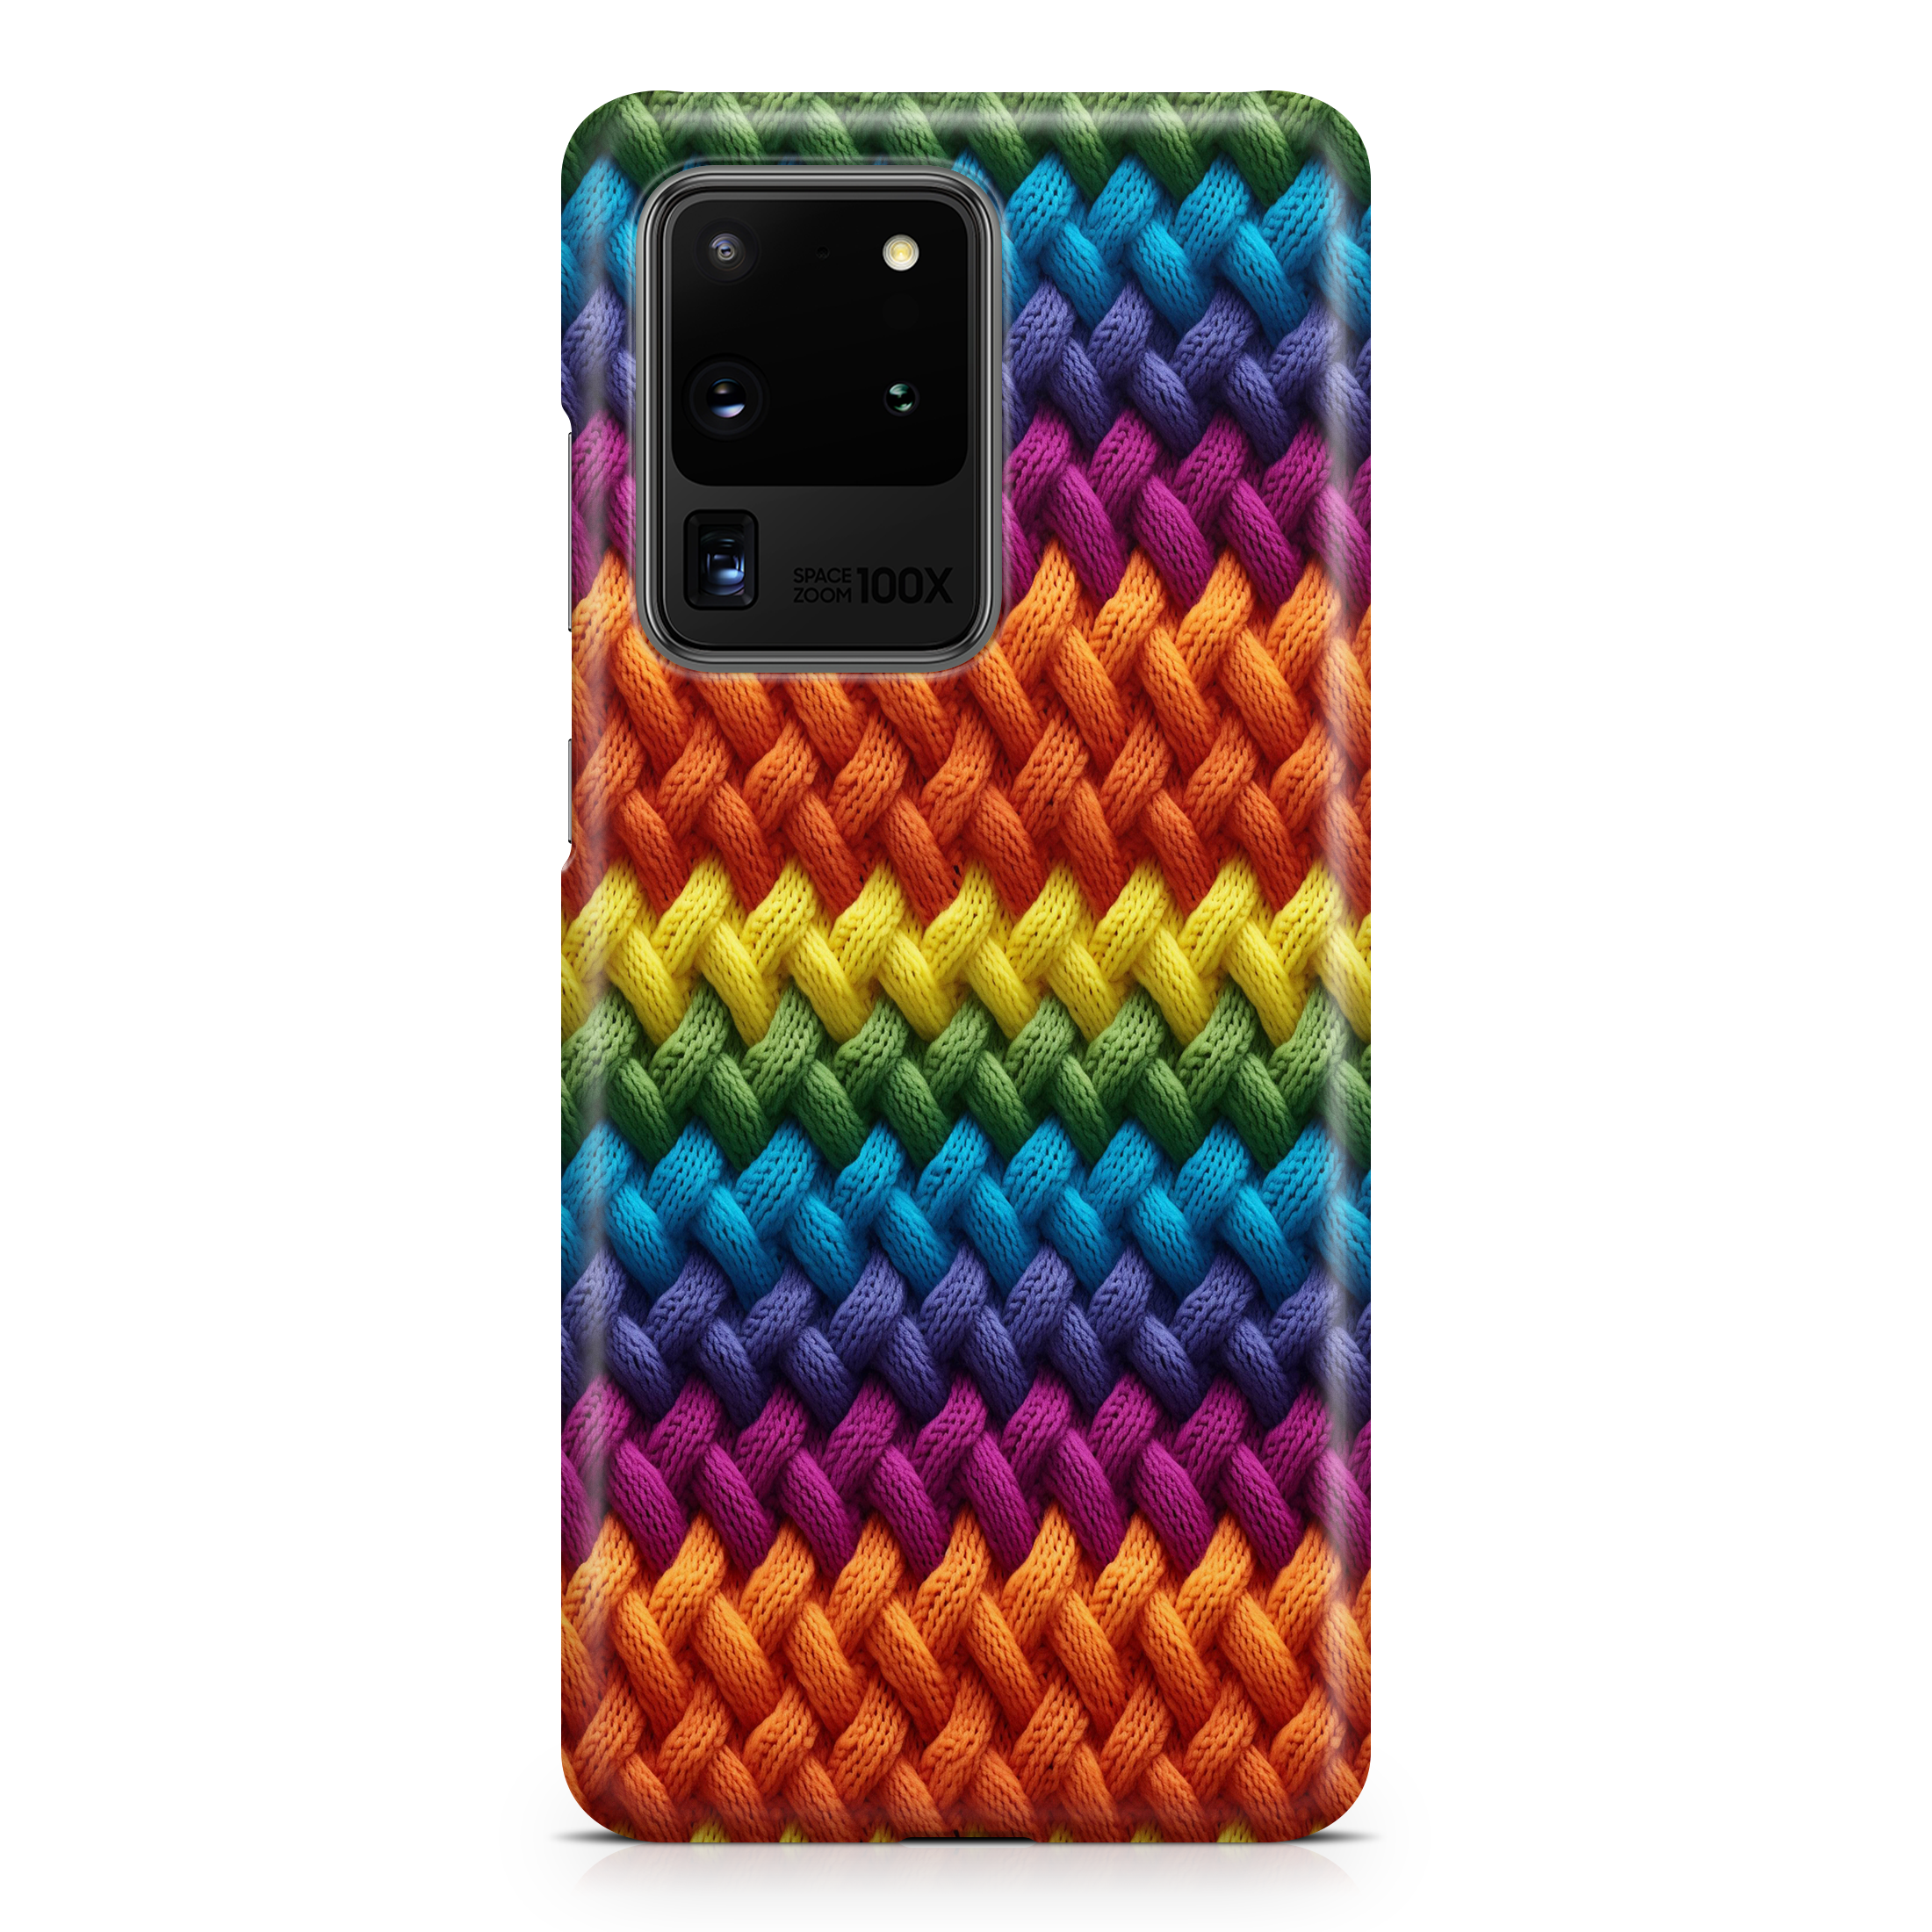 Rainbow Stitches - Samsung phone case designs by CaseSwagger